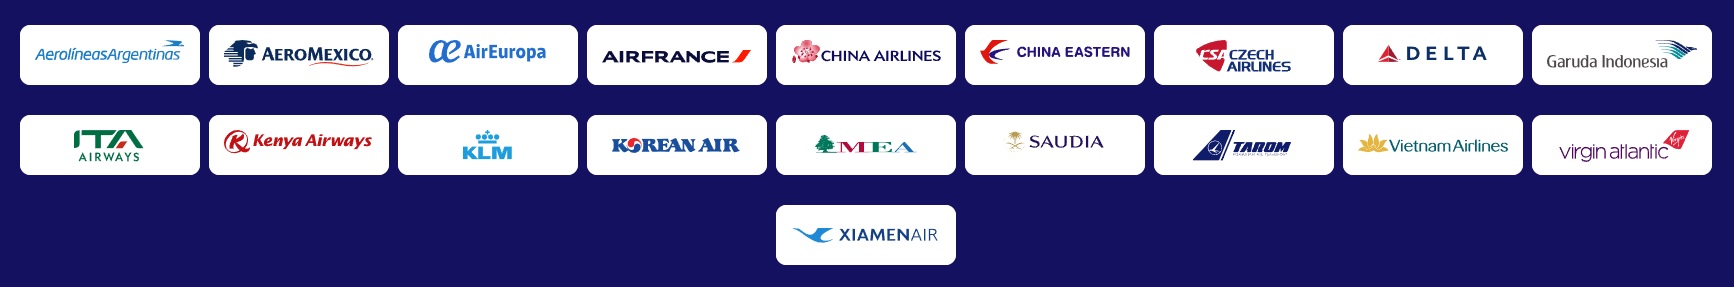 SkyTeam airlines you can book using American Express Membership Rewards points